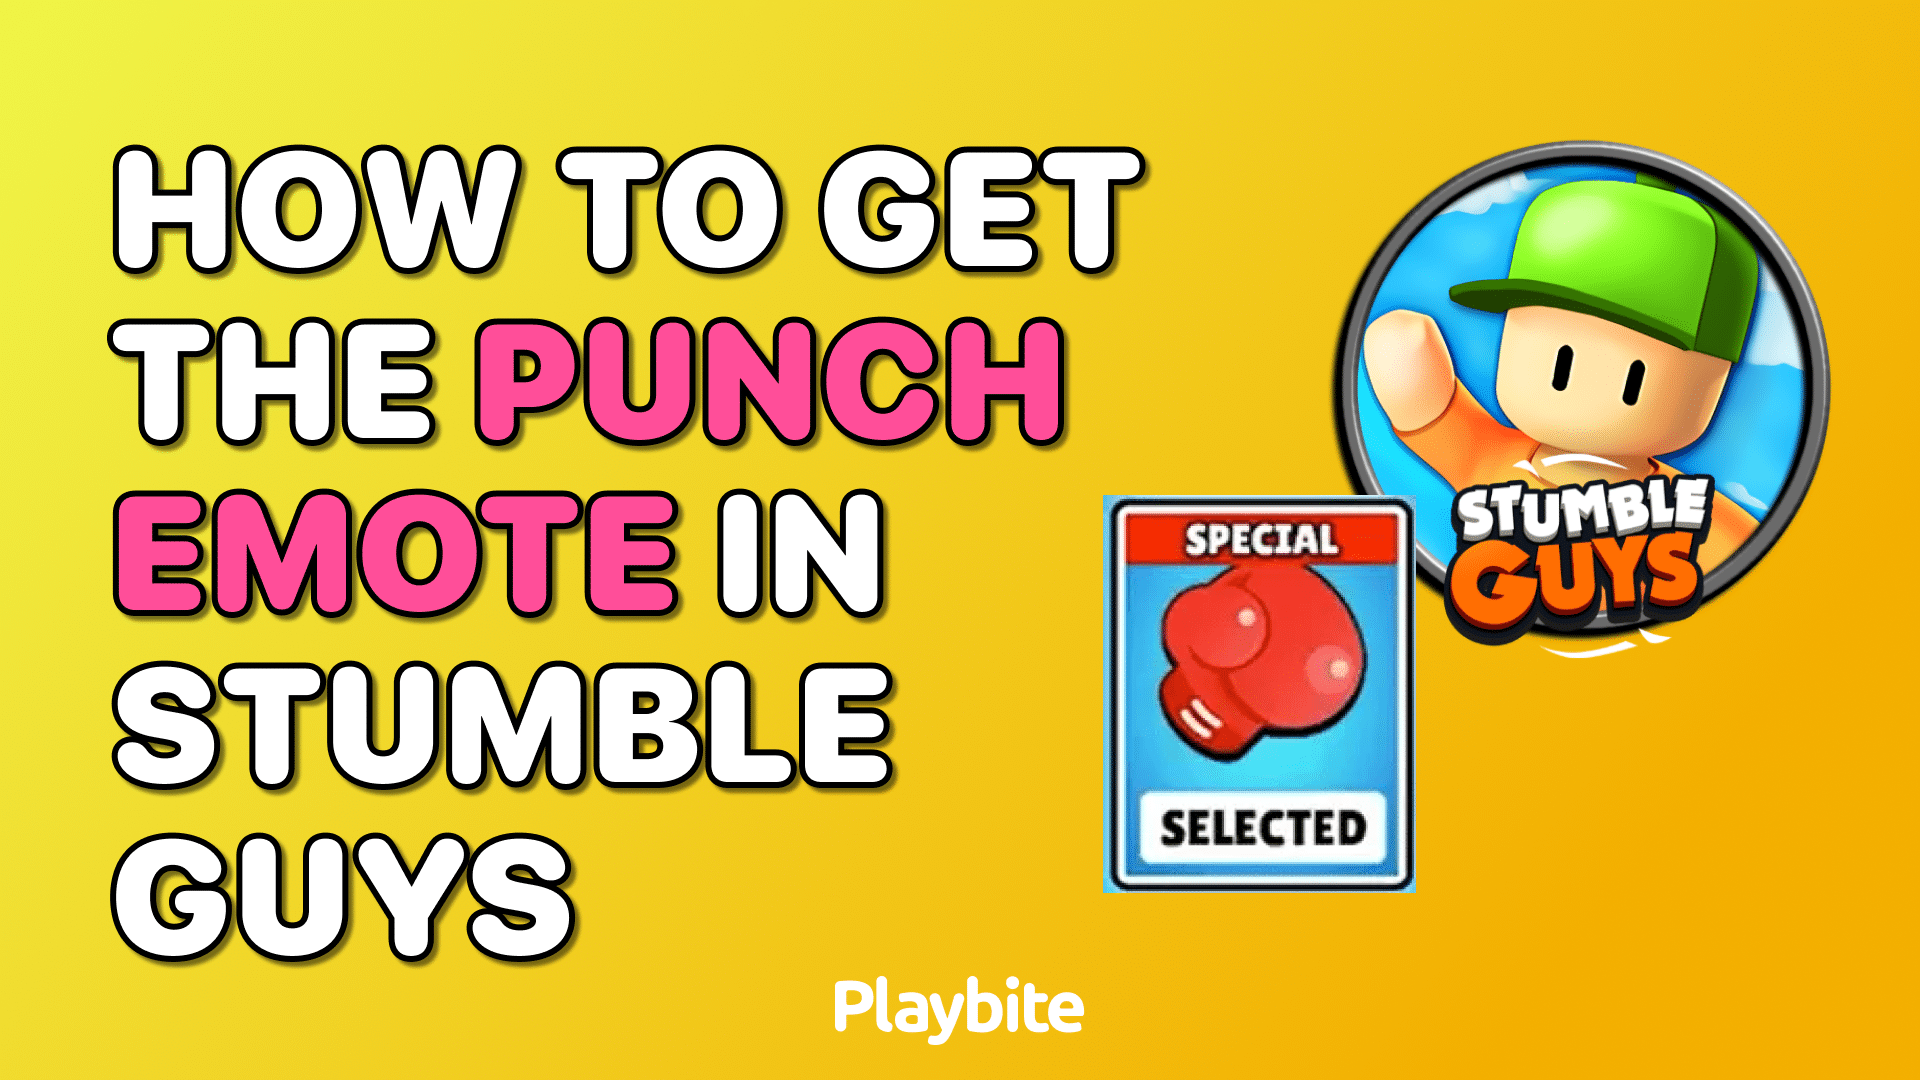 how to get FREE GEMS in Stumble Guys 